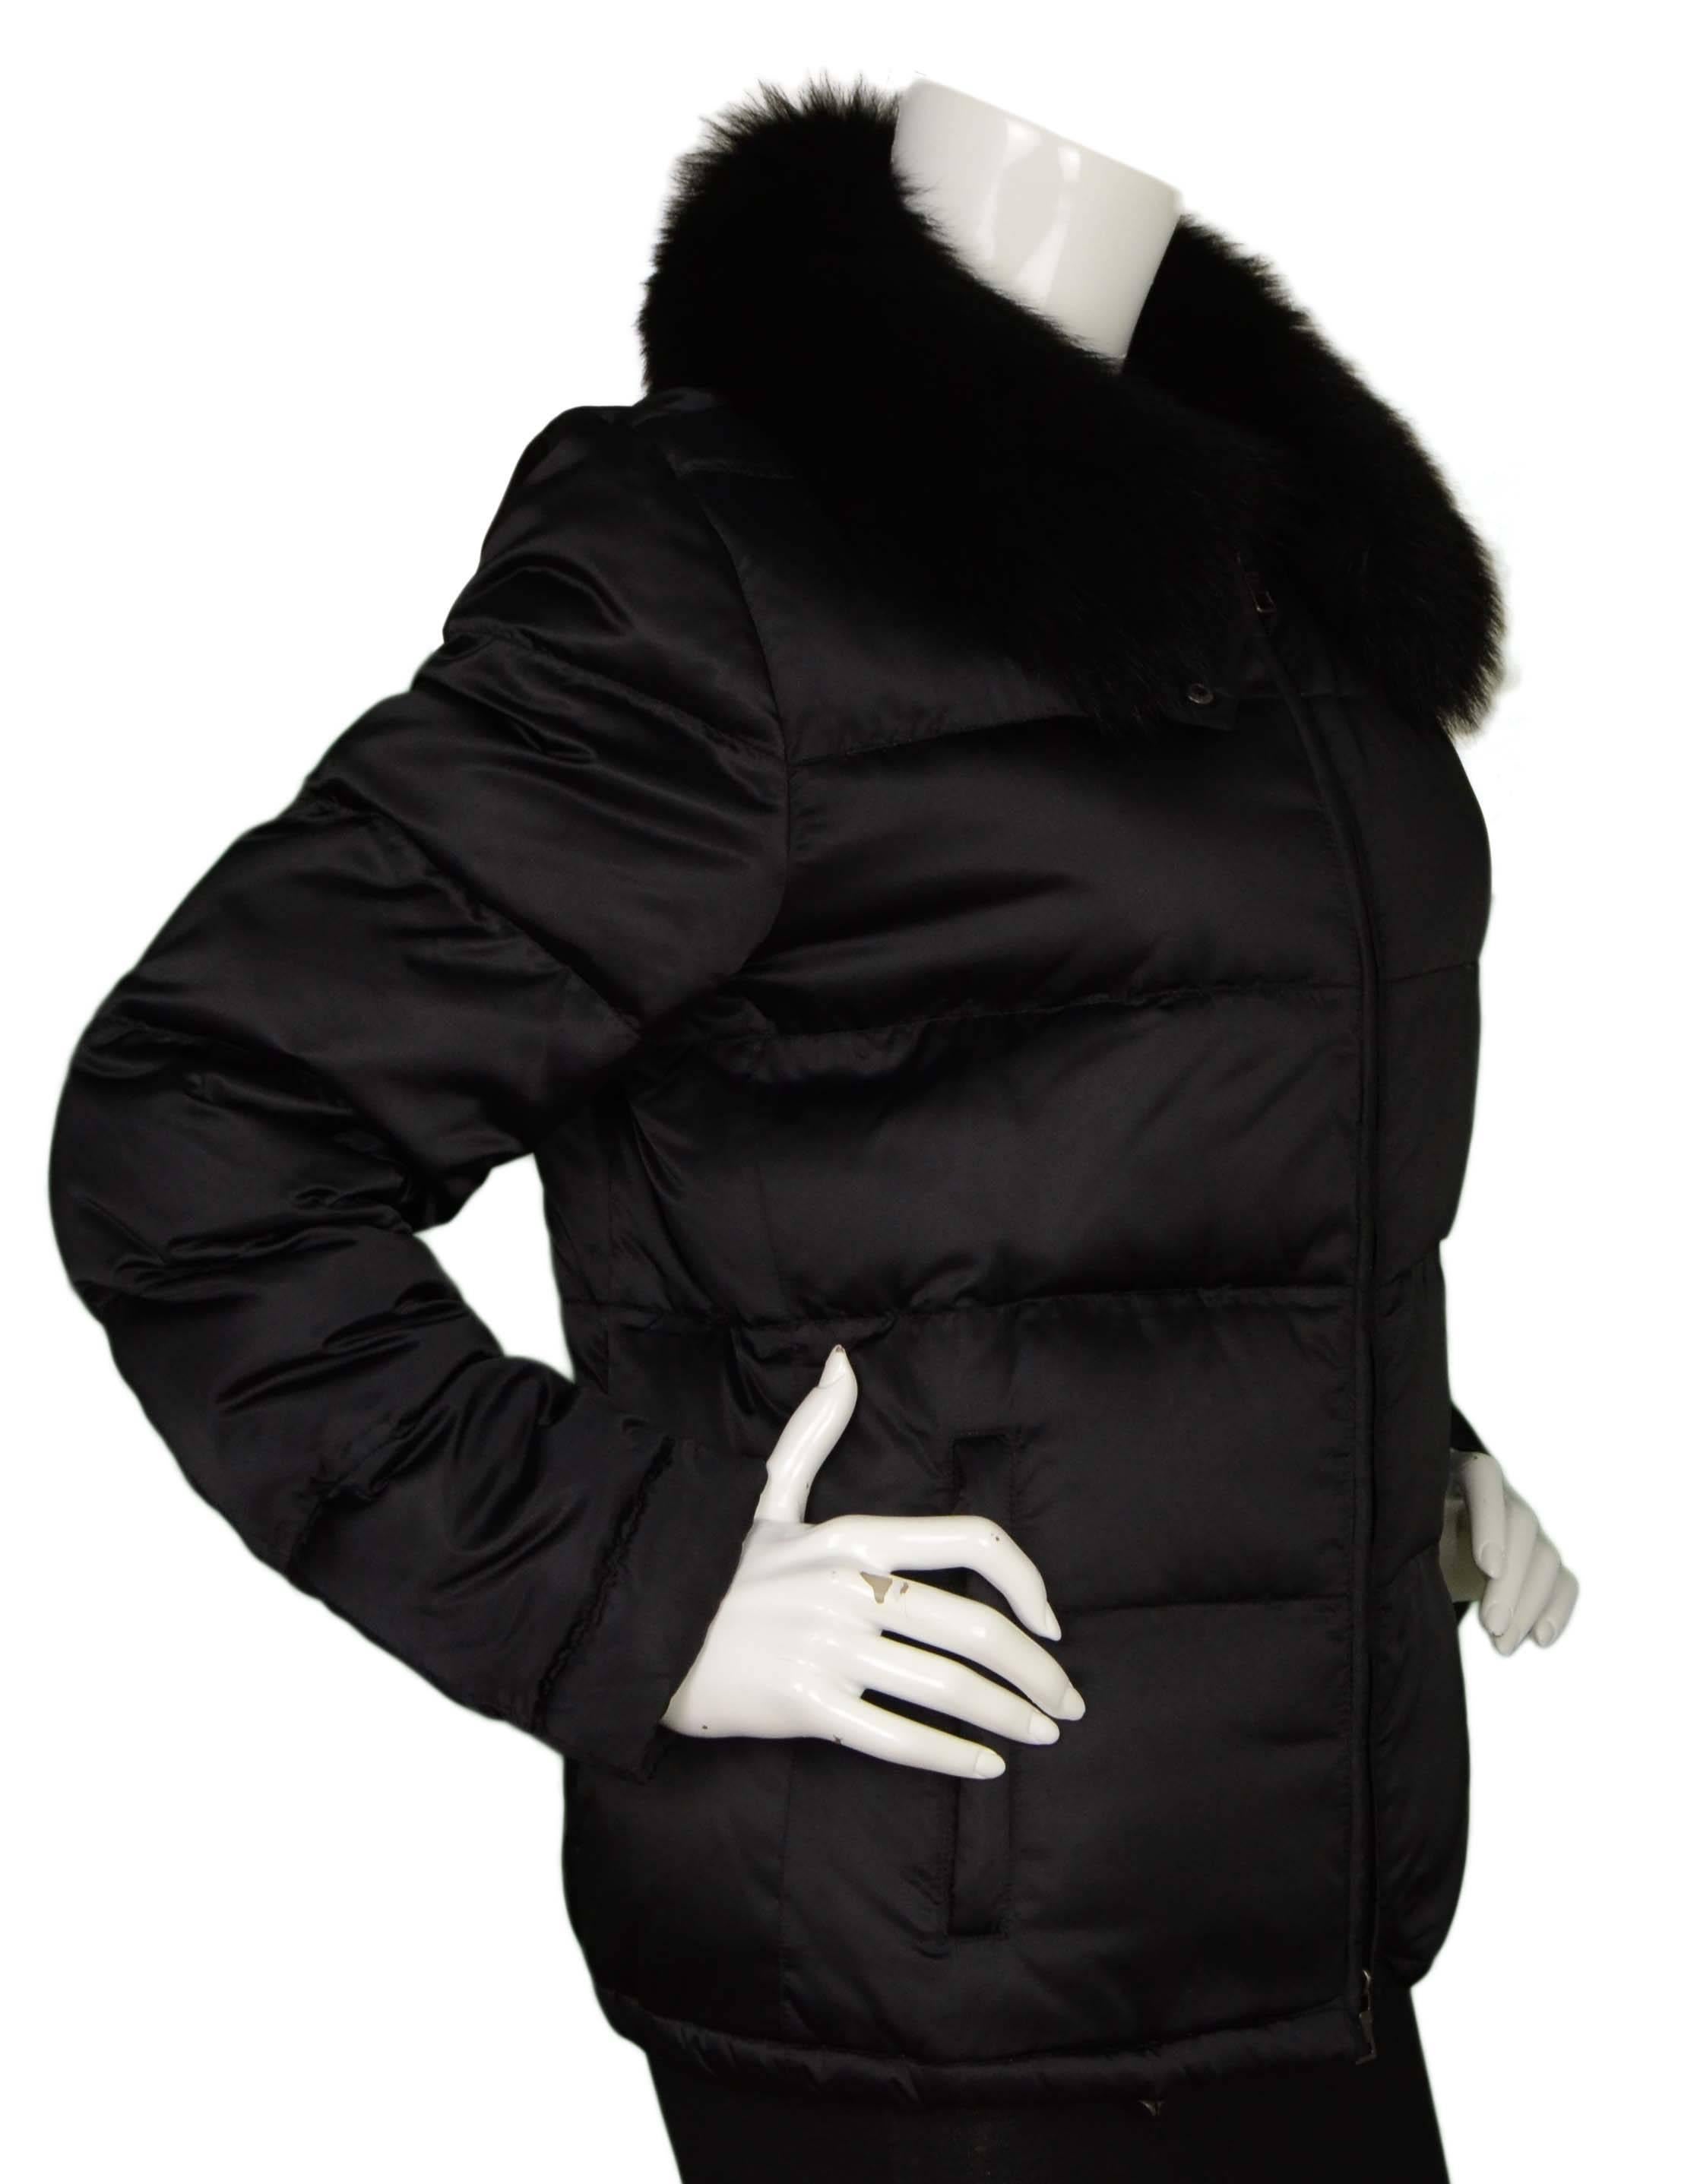 Prada Black Nylon Down Puffer Coat 
Features black raccoon removable collar
Made In: Bulgaria
Color: Black
Composition: 100% nylon, trim- 100% raccoon fur
Lining: Beige, 100% nylon
Filling: Down and white feathers
Closure/Opening: Zip up